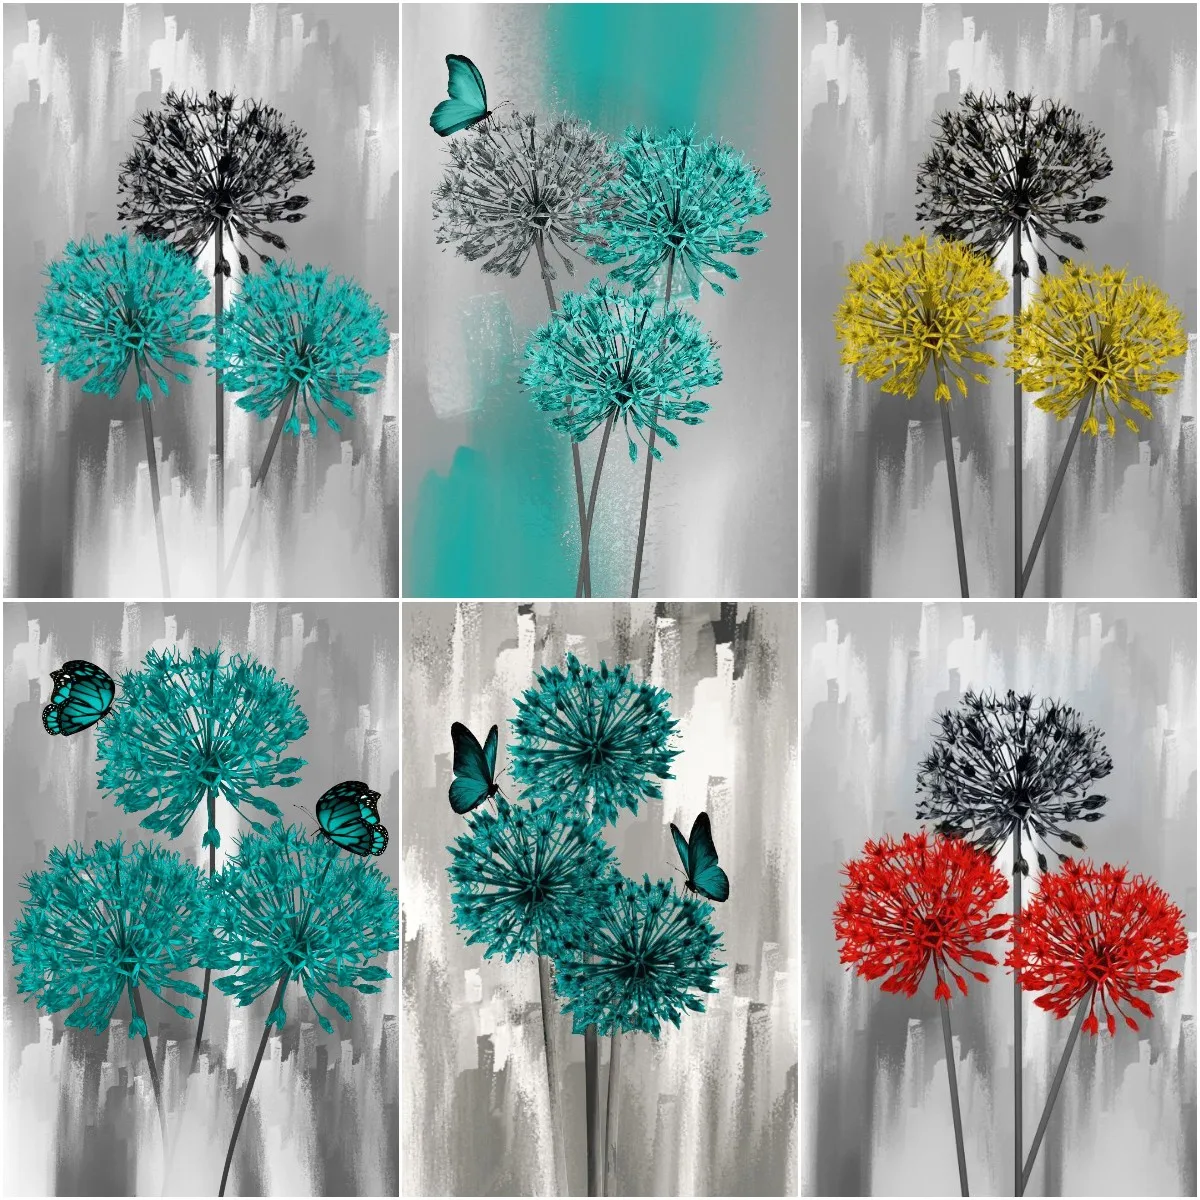 5D Diamond Embroidery Painting Blue Dandelion Butterfly Wall Art Cross Stich Kits Pictures Of Plants Handcraft Inter Decoration